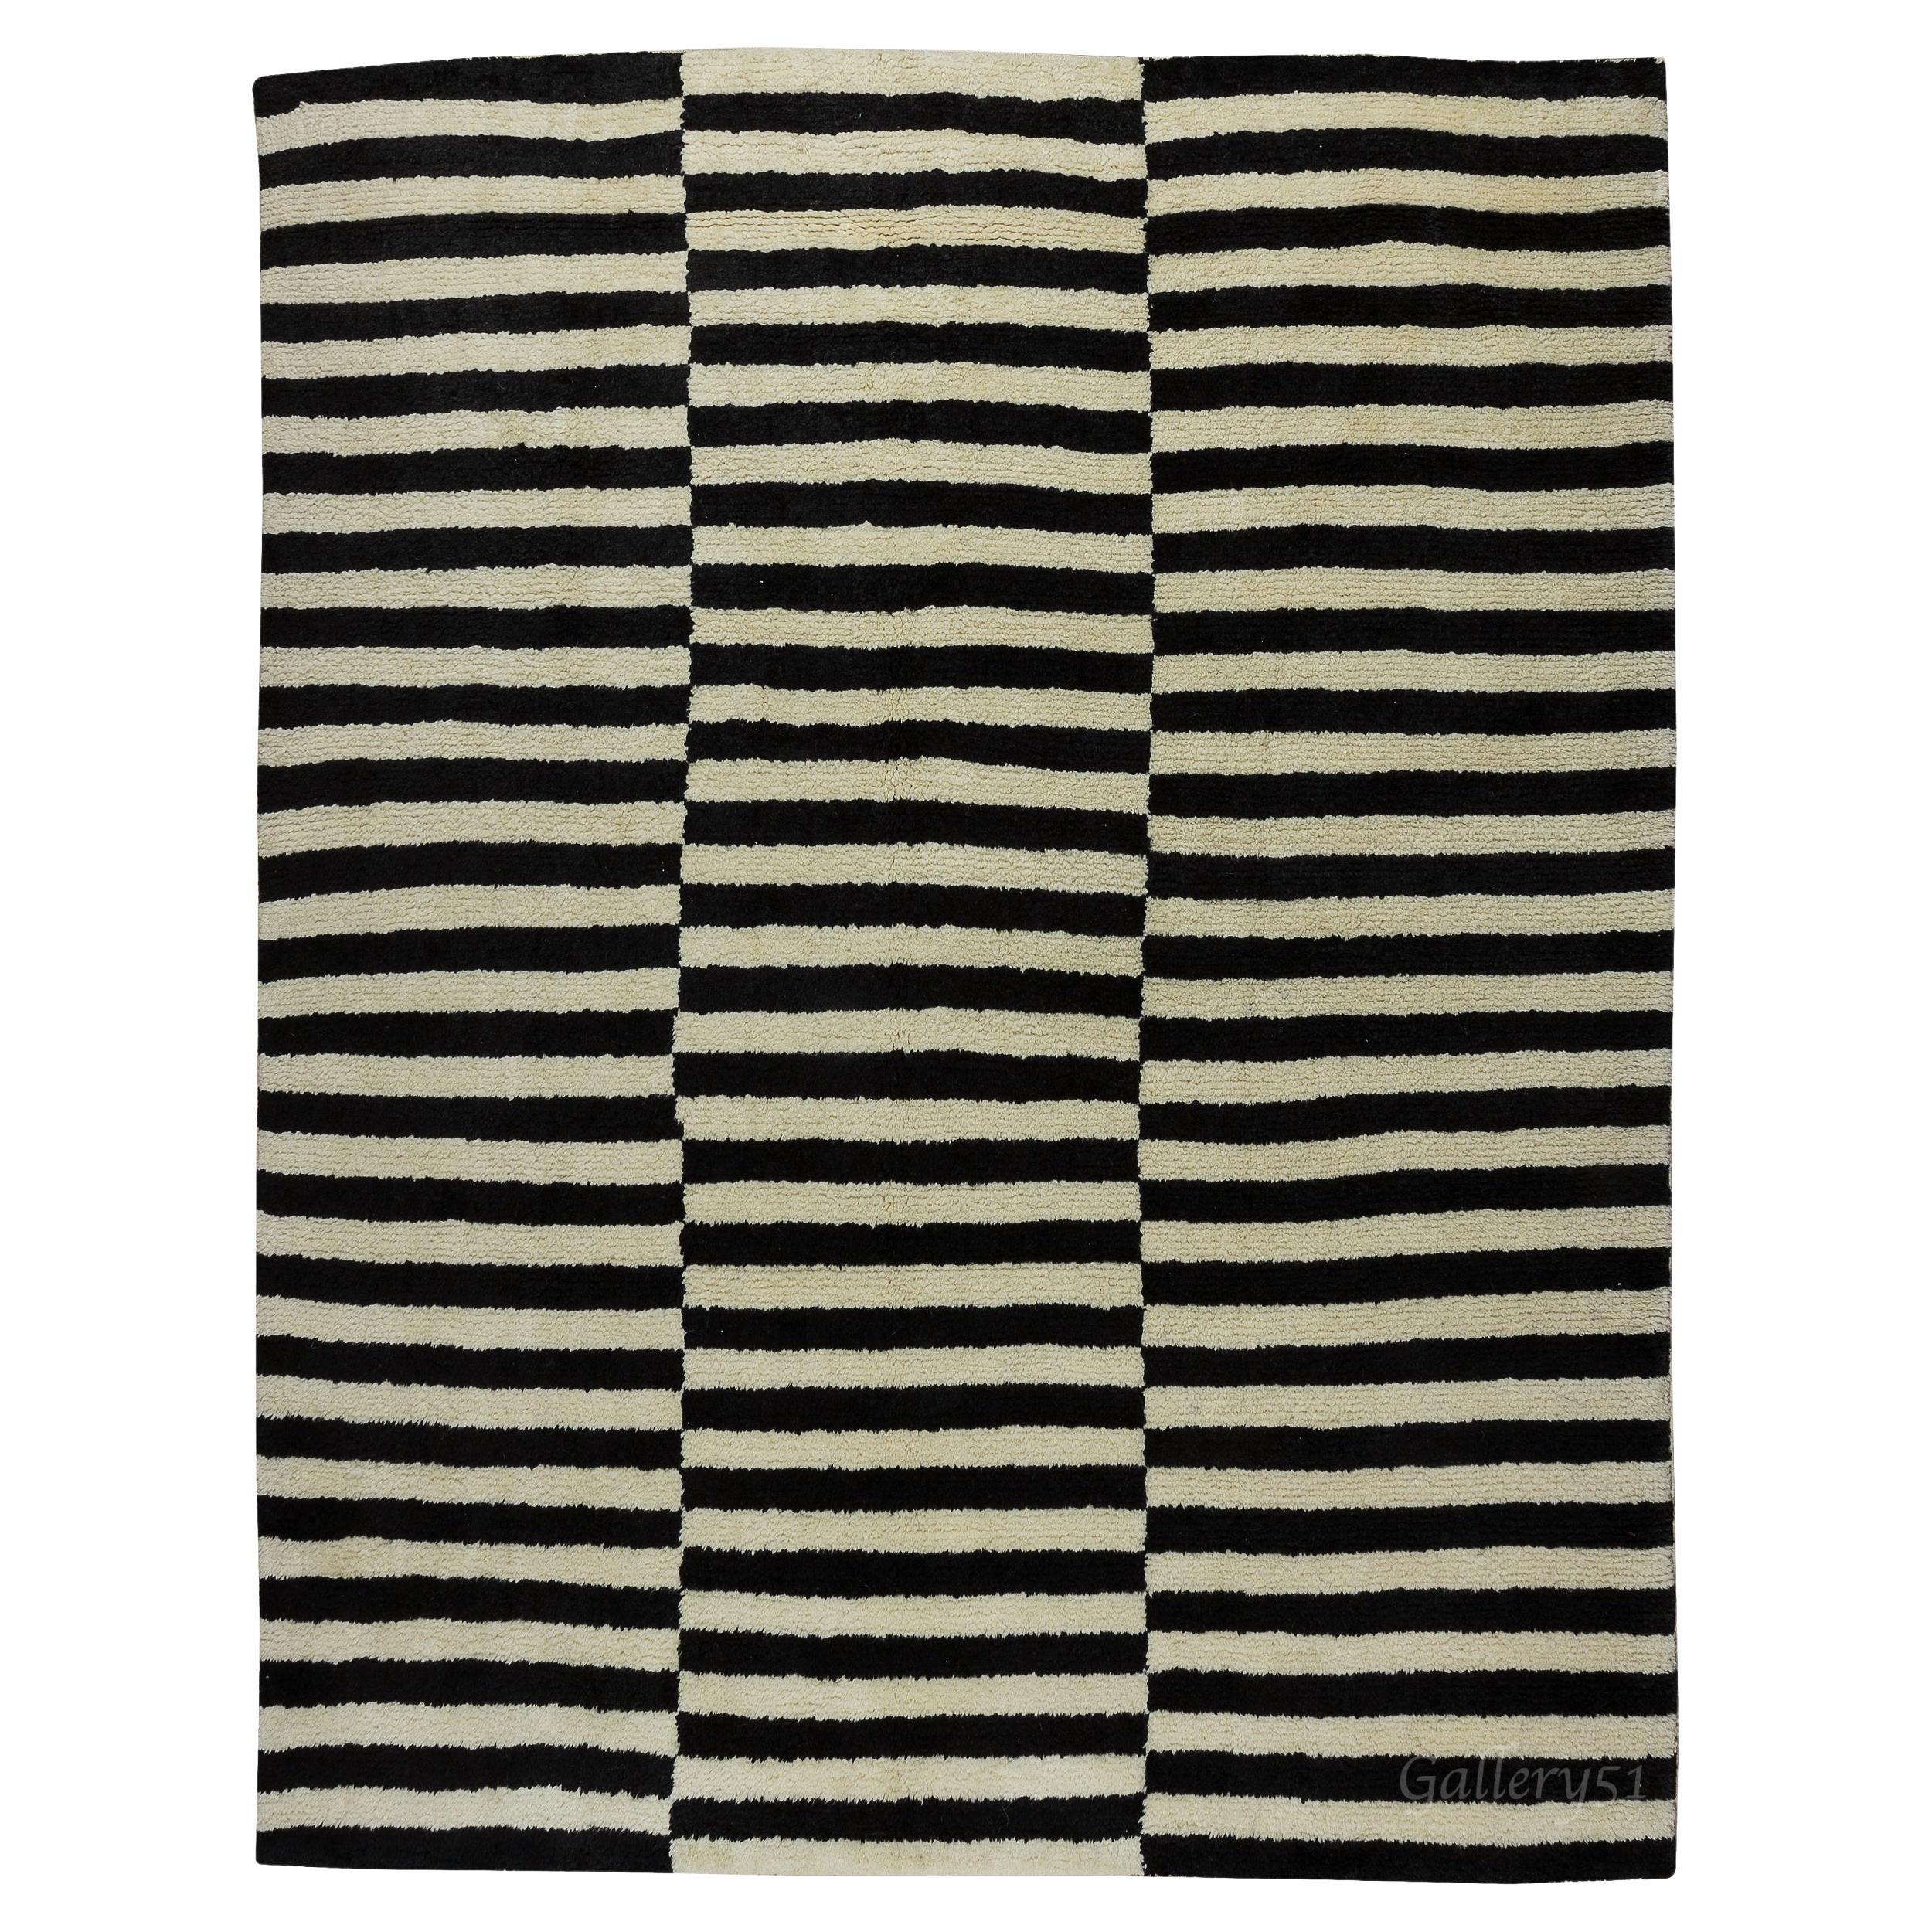 Custom Modern Striped Hand Knotted "Tulu" Rug Made of Soft Cream and Black Wool